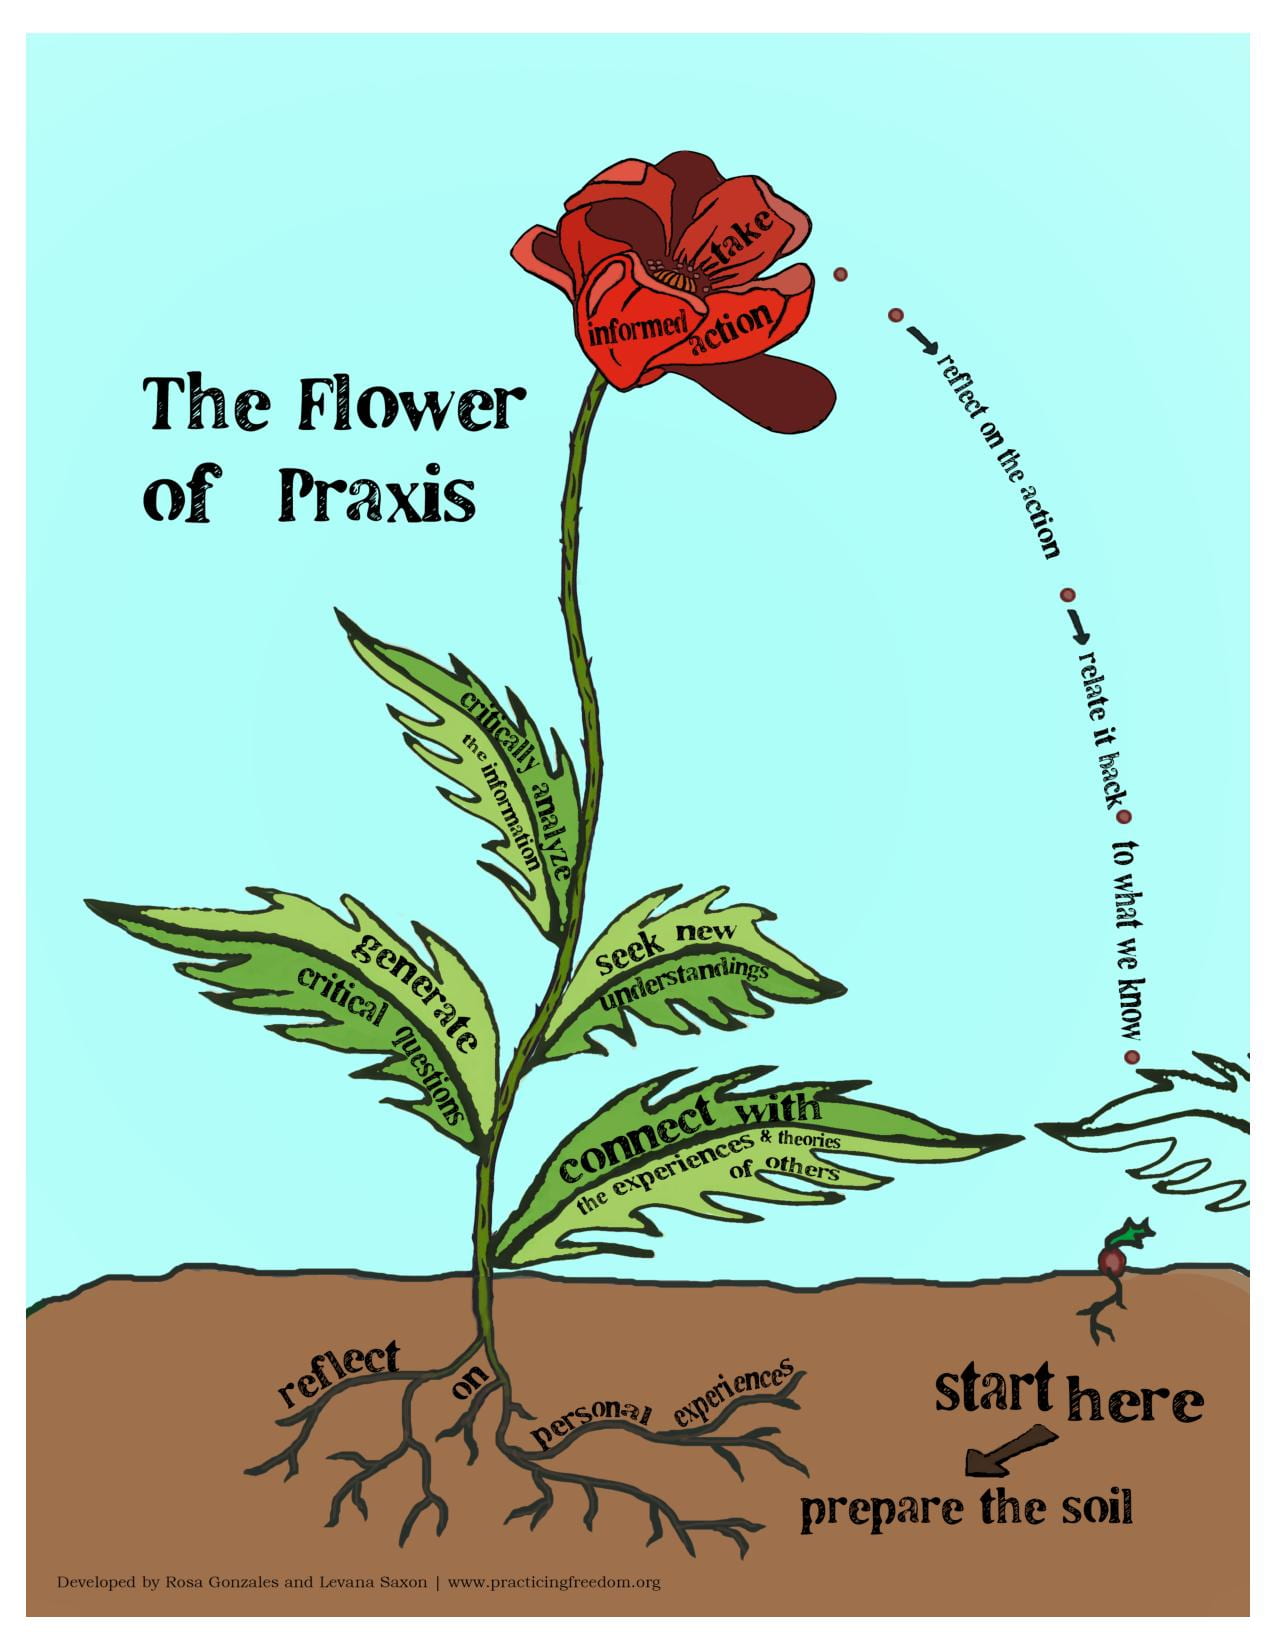 A flower growing from soil with roots showing the process of praxis